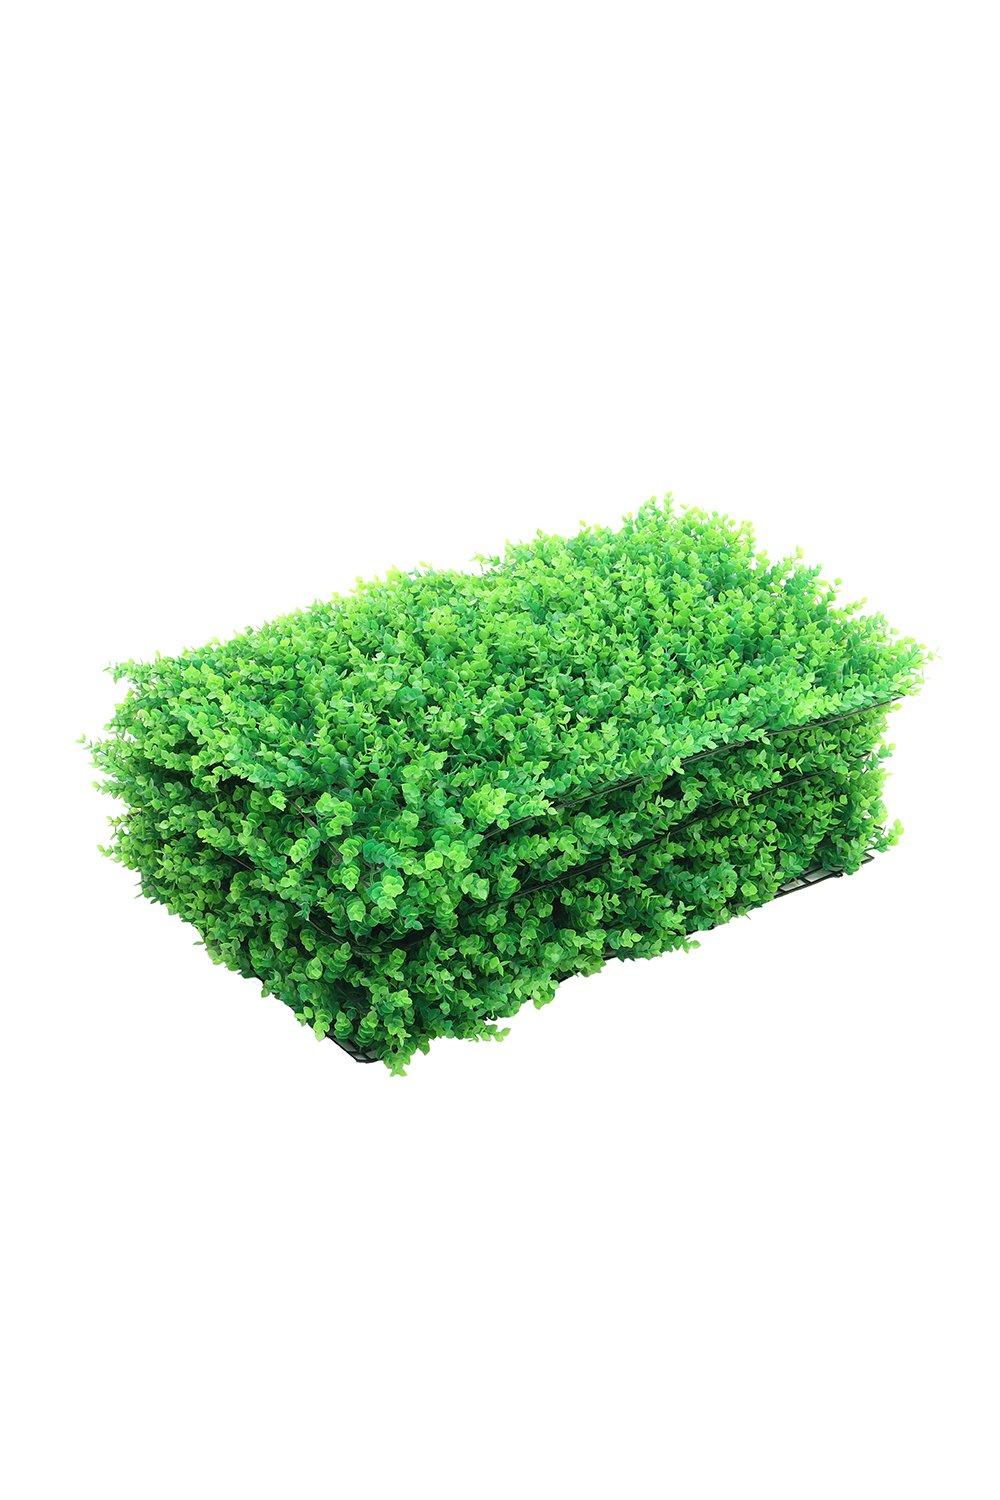 6 Pcs Artificial Boxwood Plant Panel Wall Decoration Privacy Hedge Screen